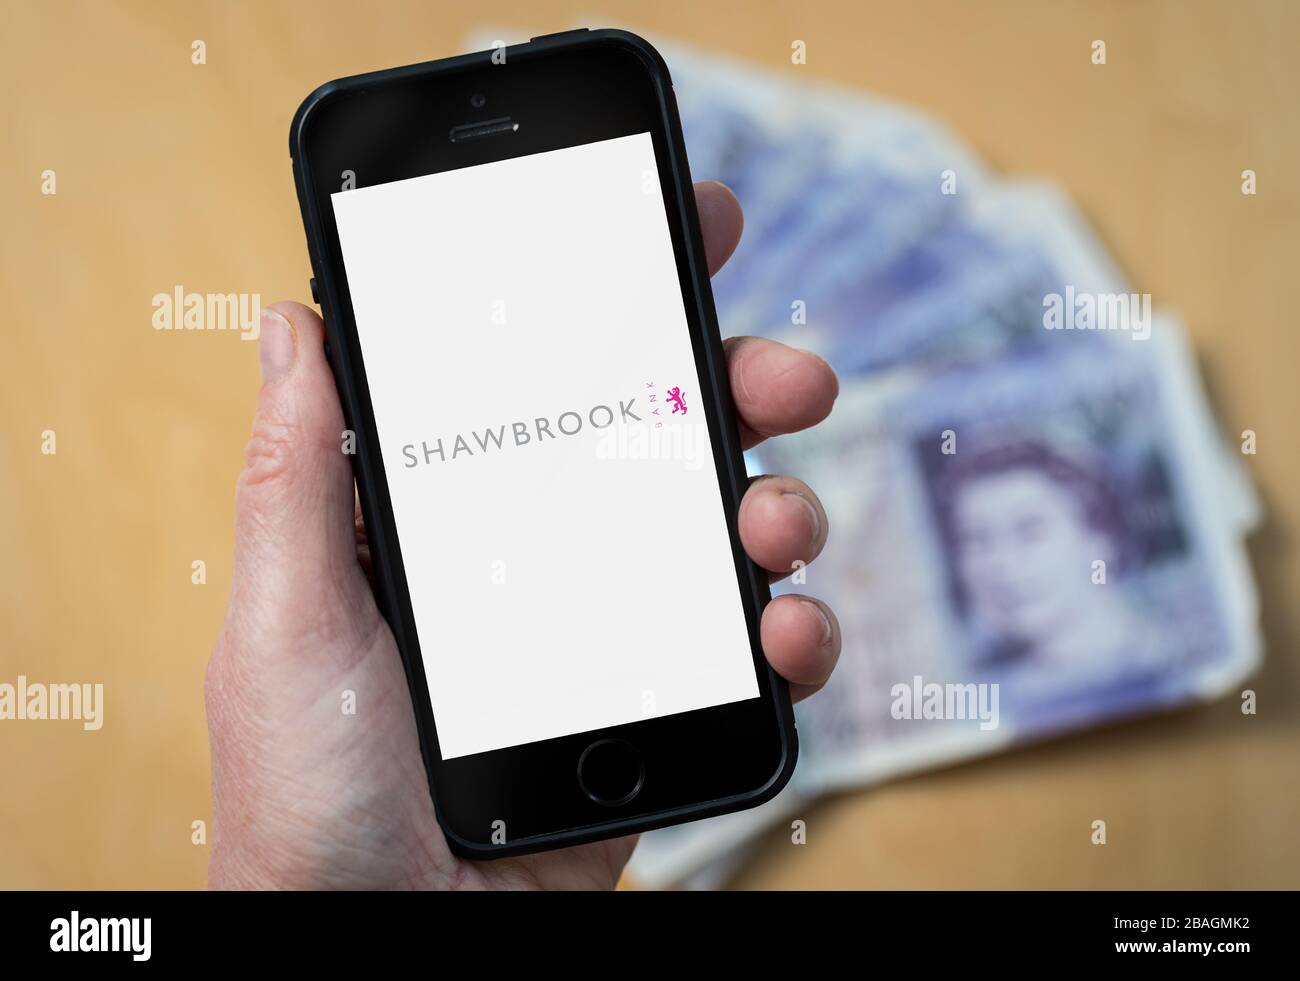 A woman looking at the Shawbrook Bank logo on a mobile phone. (editorial Use Only) Stock Photo